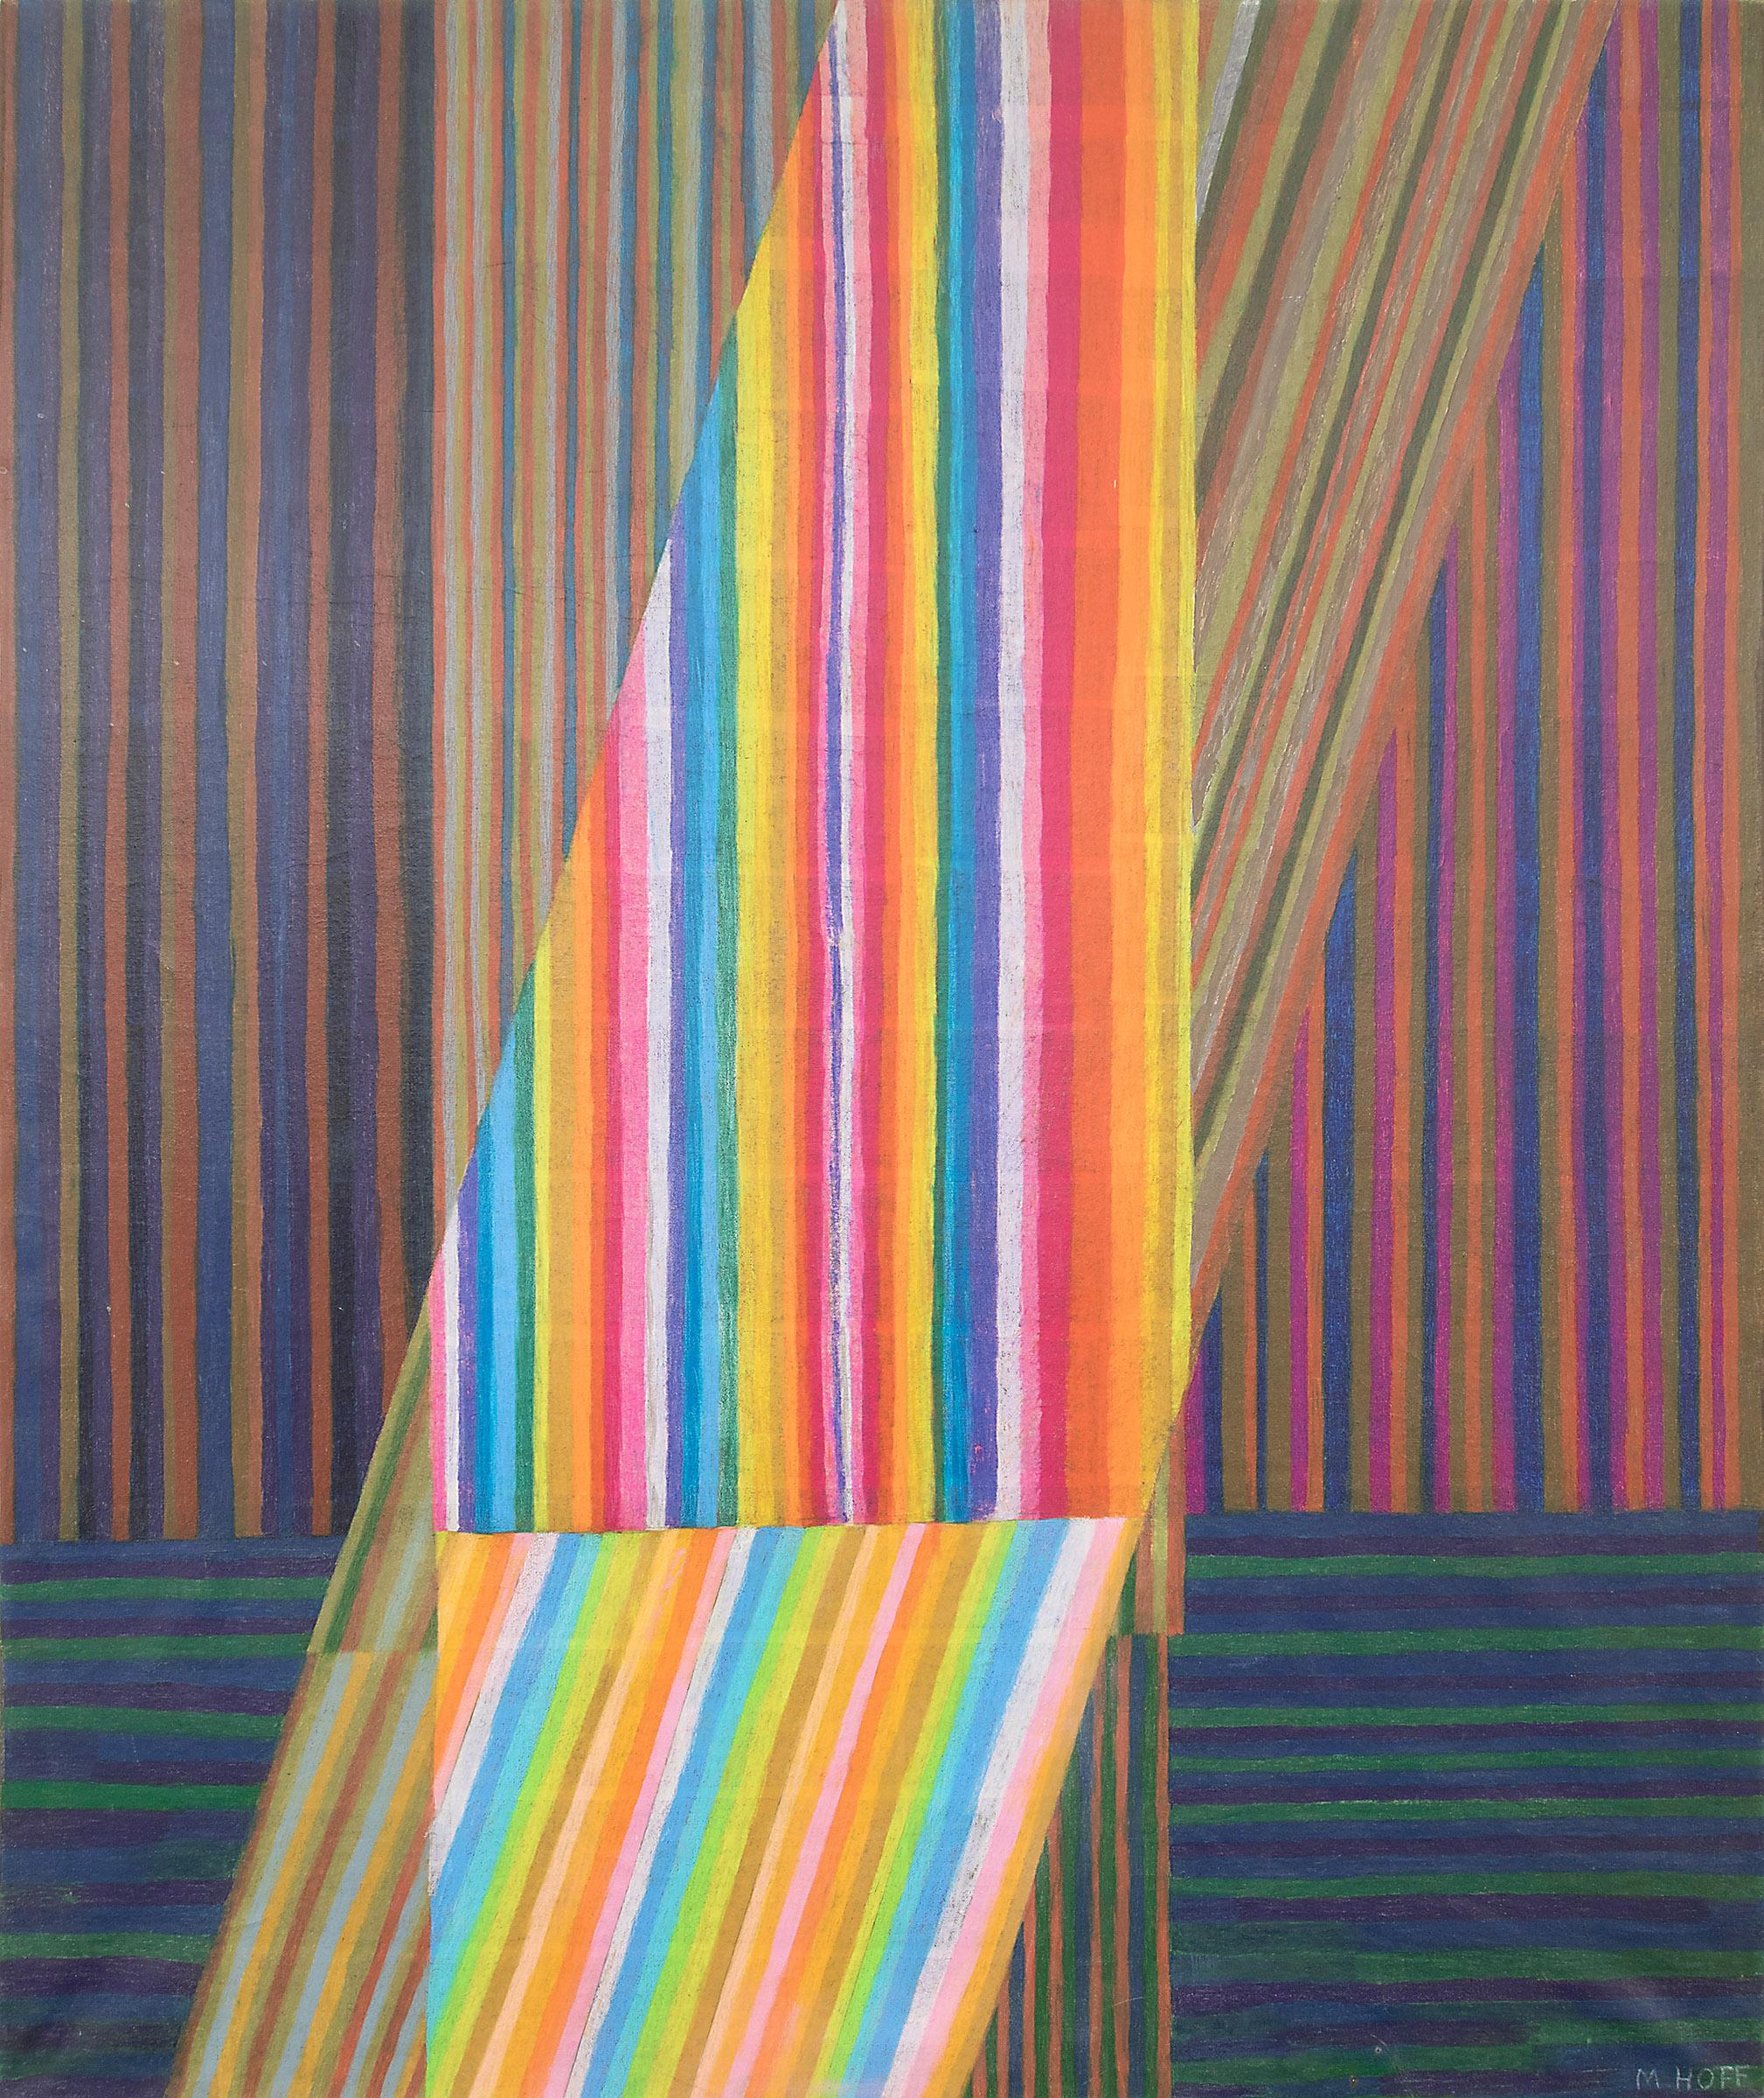 Abstract oil and pastel on canvas titled 'Rainbow River' painted in 1979 by artist Margo Hoff (1910-2008). Vertical large scale work with rainbow colored stripes across the canvas. Wrapped canvas with finished edges that are ready for hanging;